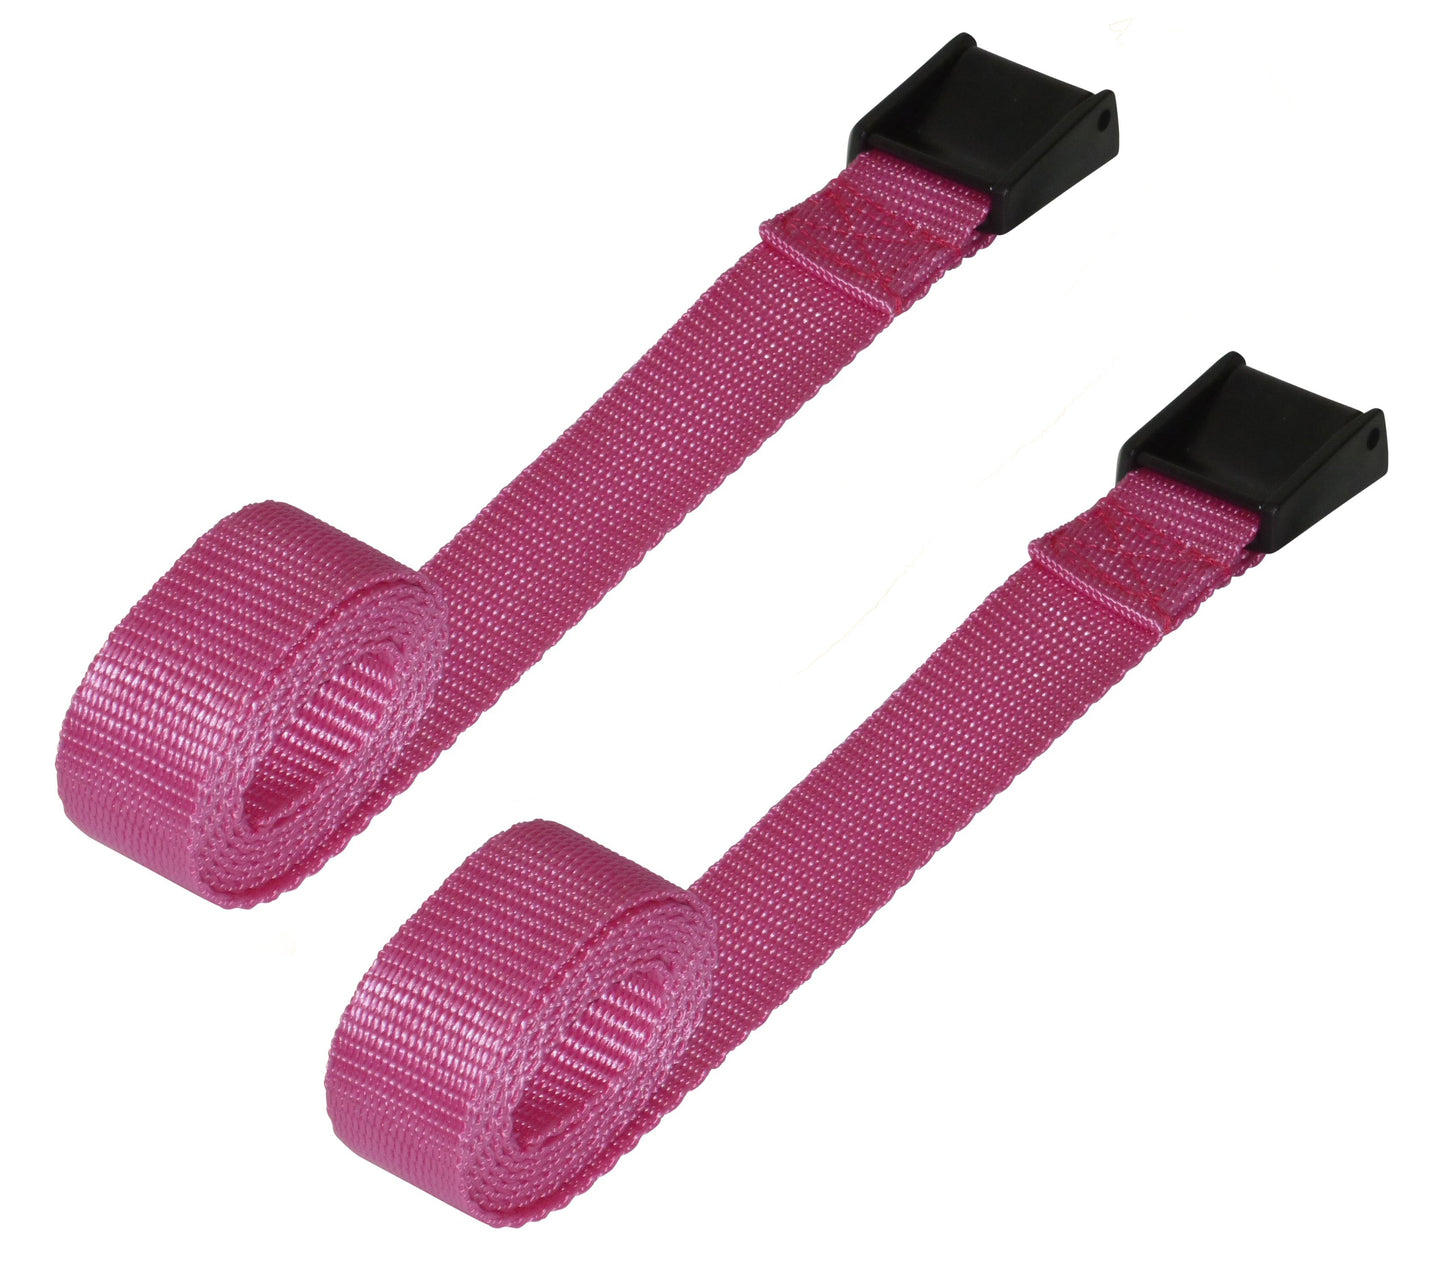 25mm Webbing Strap with Cam Buckle (Pair)